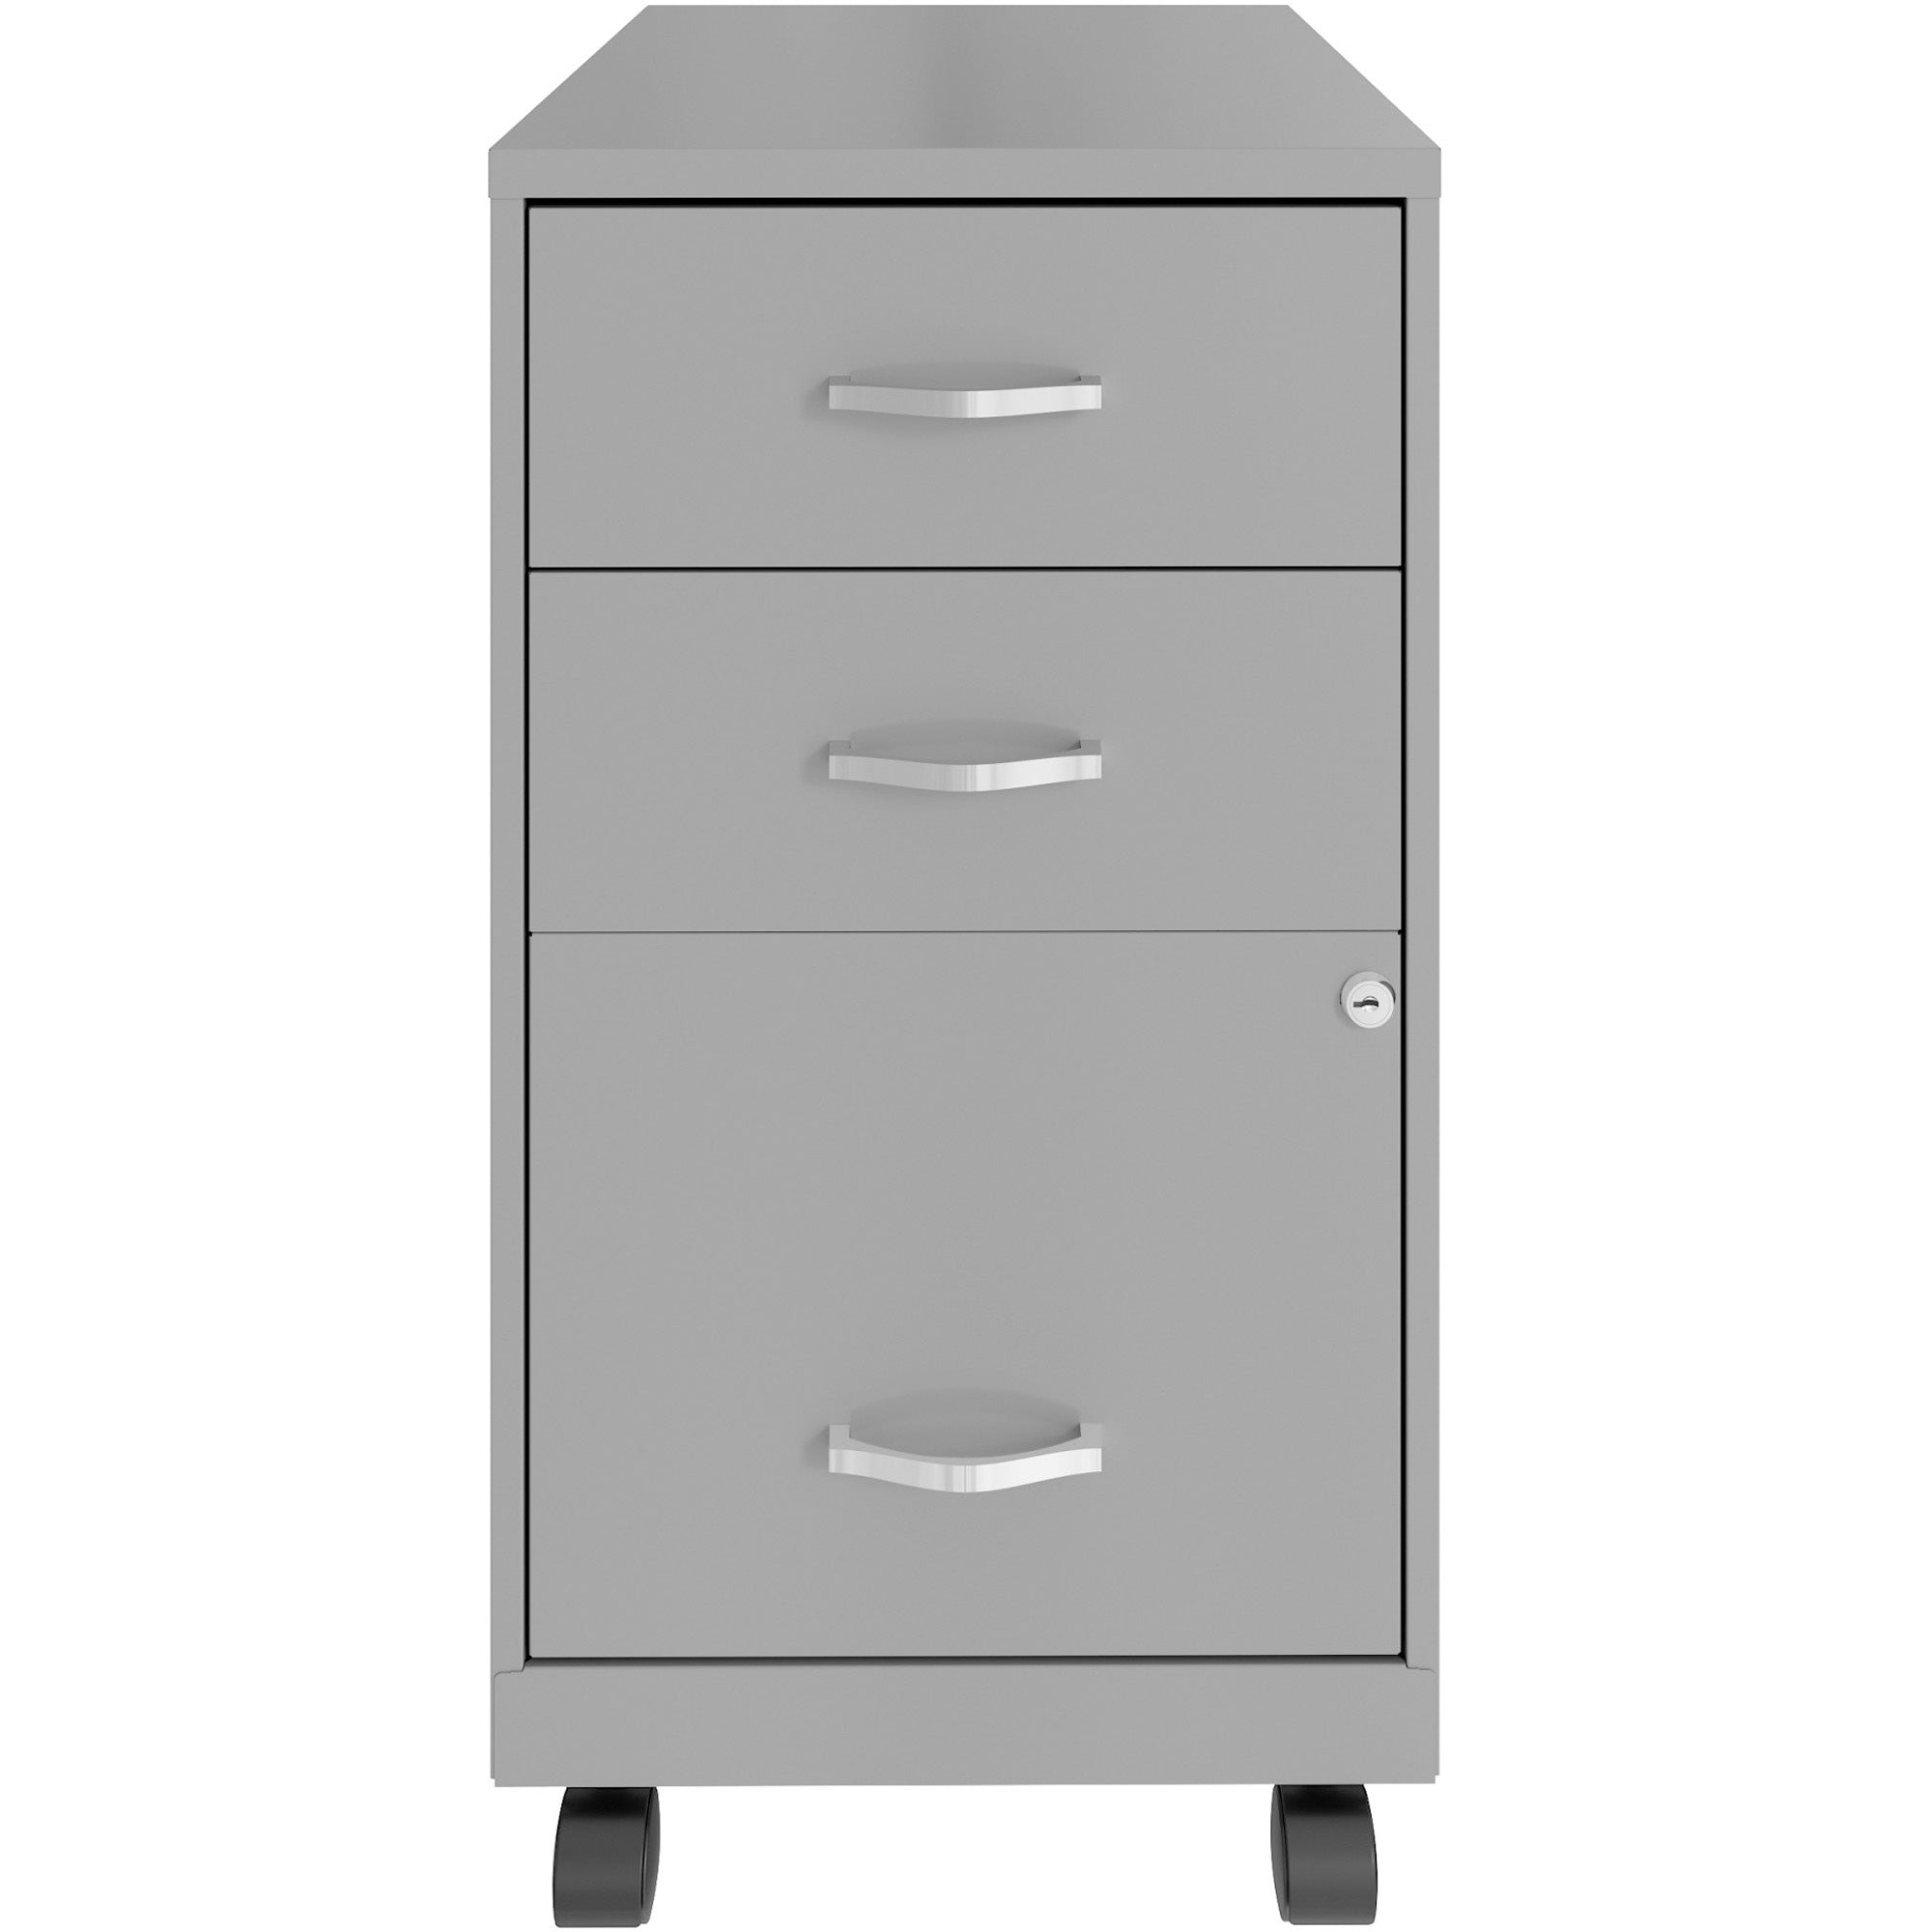 nusparc-3-drawer-organizer-metal-file-cabinet-142-x-18-x-267-3-x-drawers-for-file-box-letter-glide-suspension-3-4-drawer-extension-anti-tip-lockable-mobility-gray-metal-recycled_nprvf318cmsr - 2